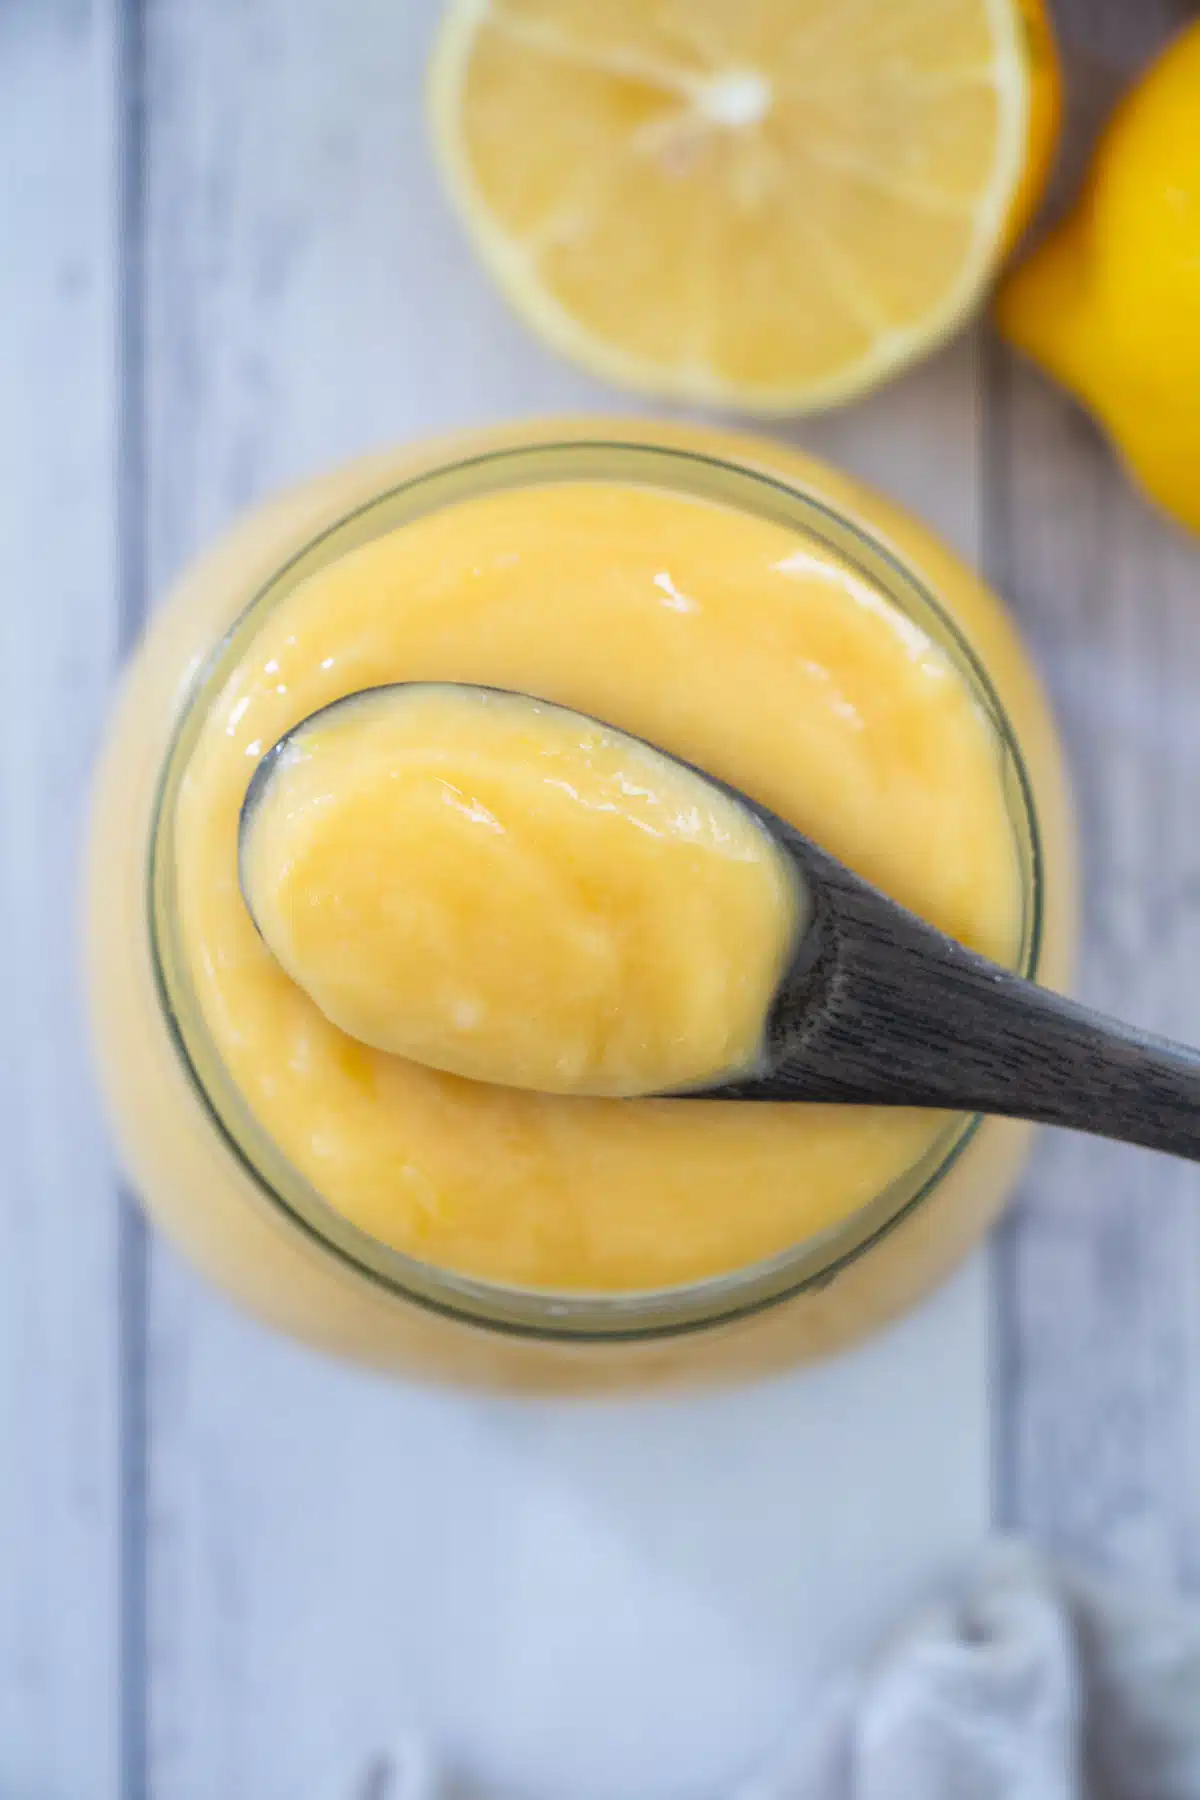 A close up looking at a jar of lemon curd with a small wooden spoon on top that has been dipped into the curd. A few lemons can be seen in the background.